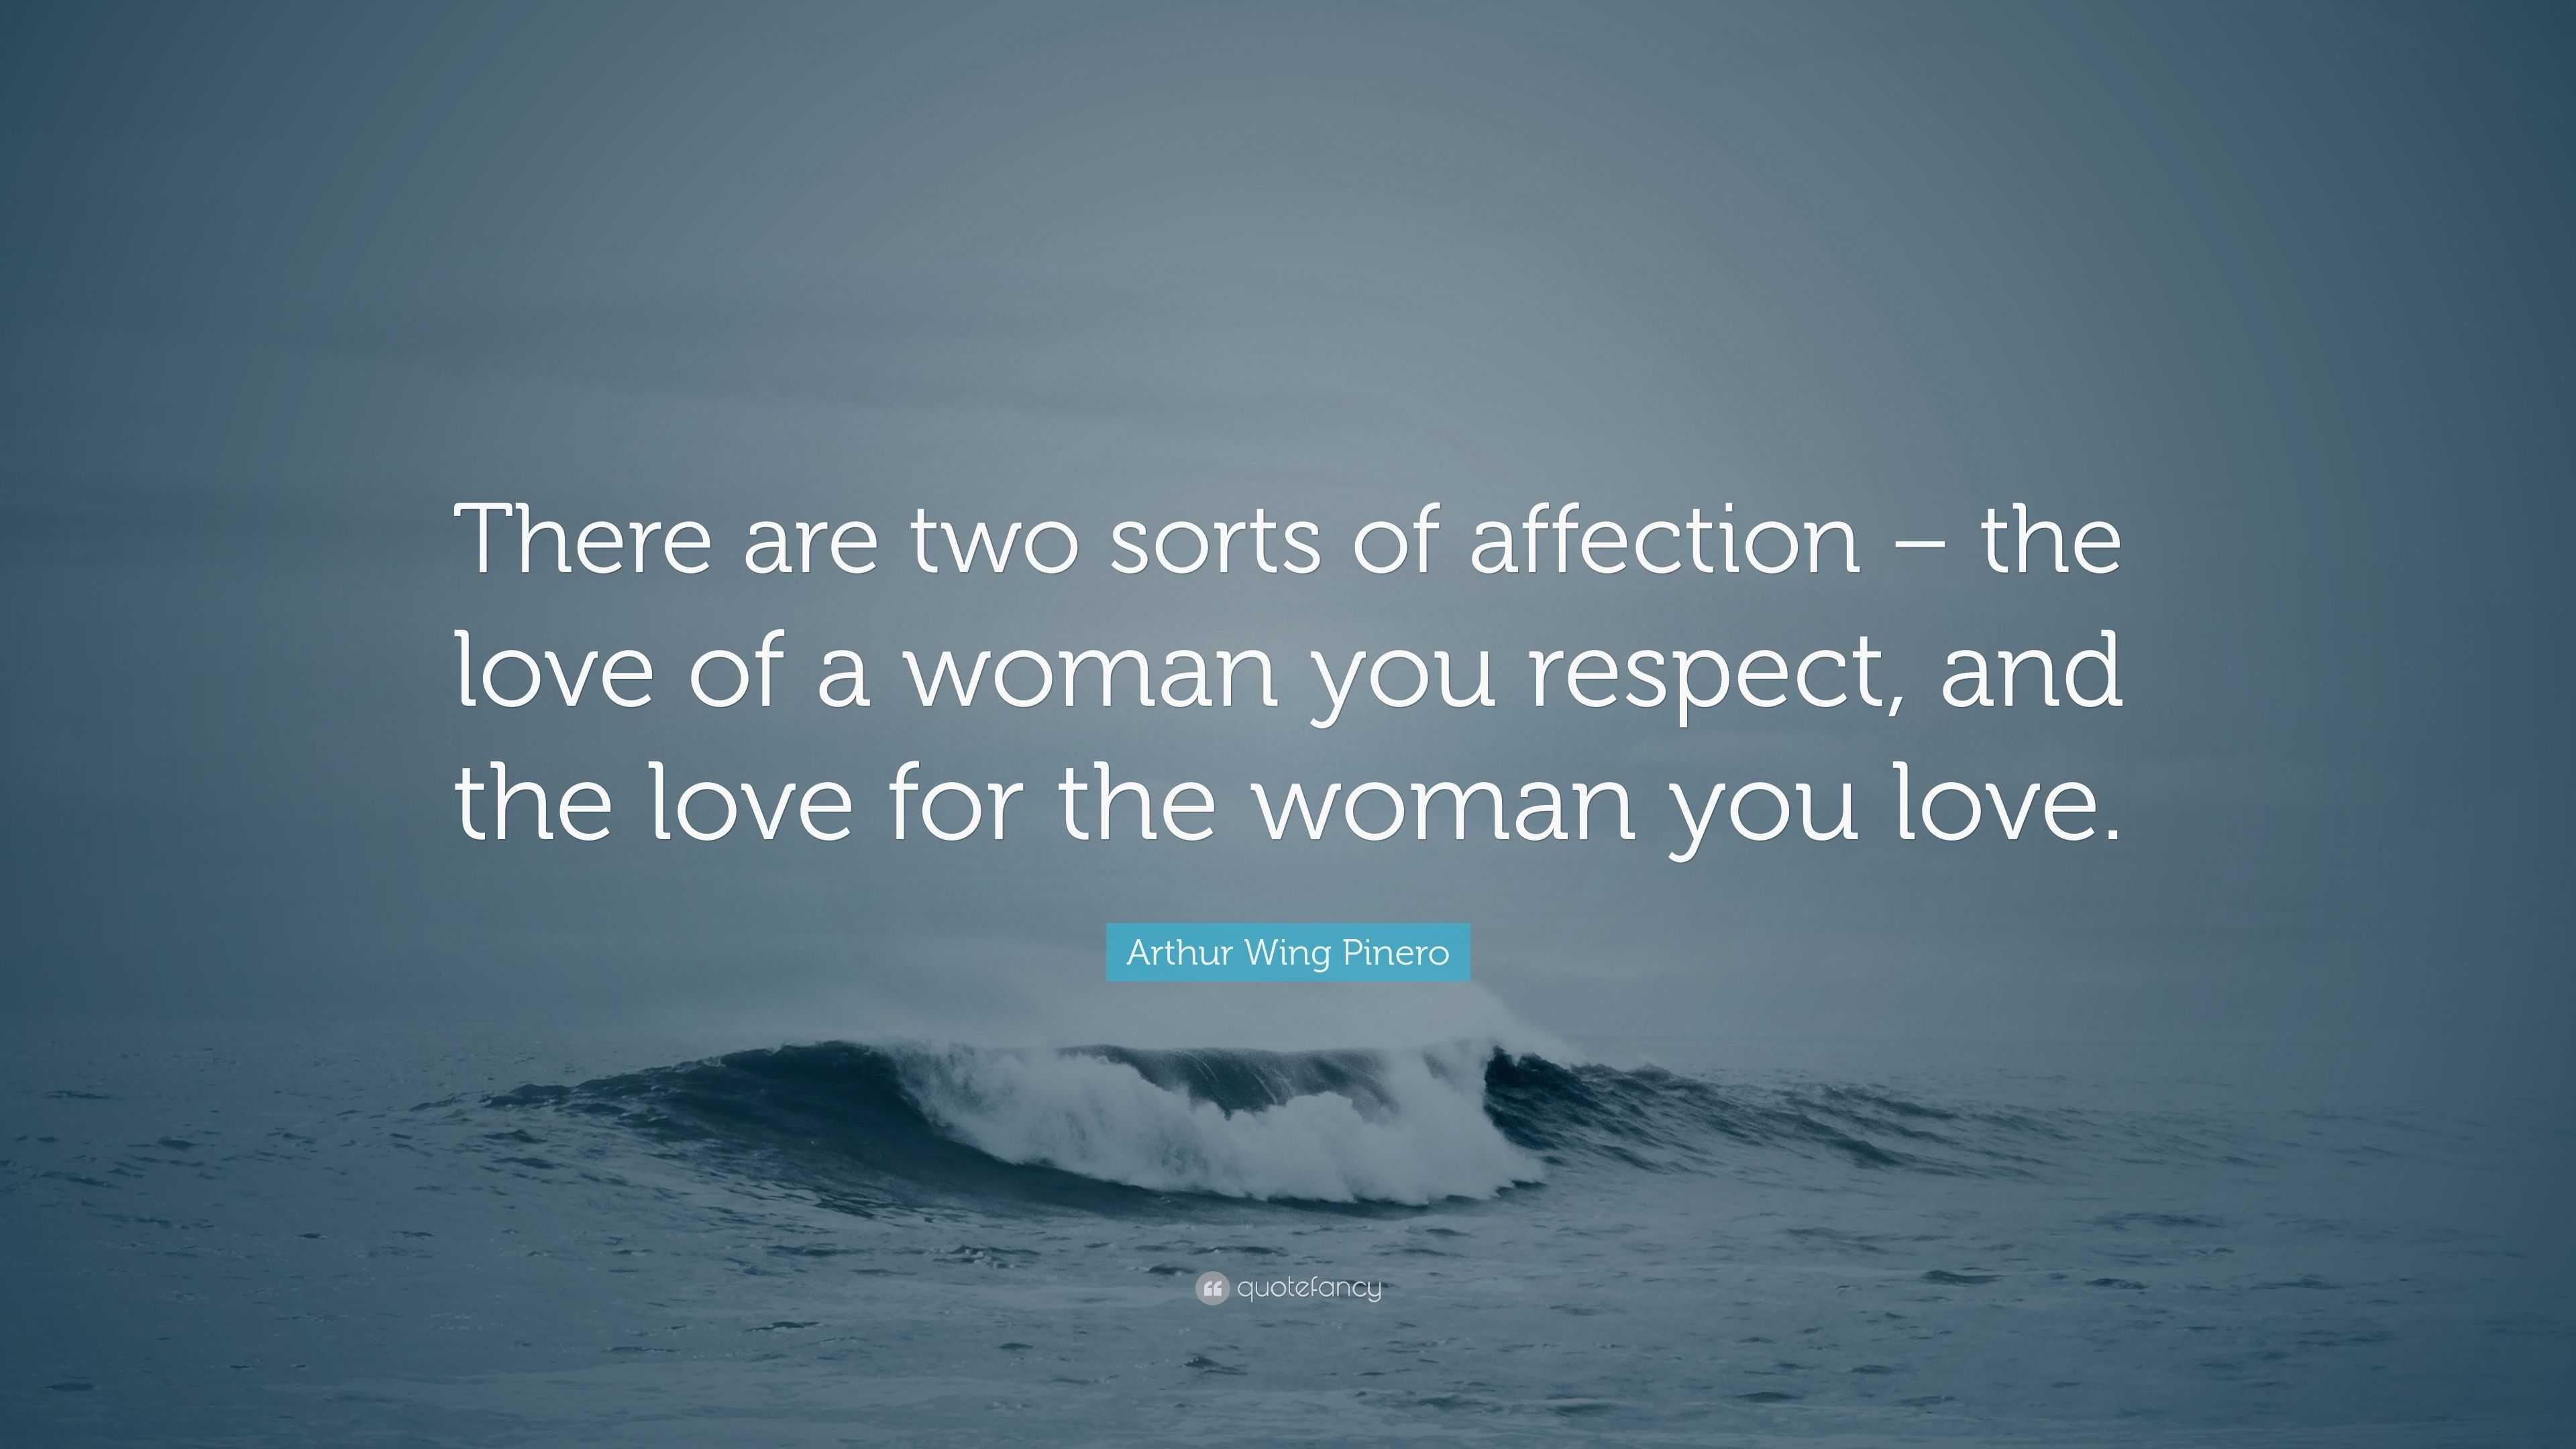 Arthur Wing Pinero quote: There are two sorts of affection - the